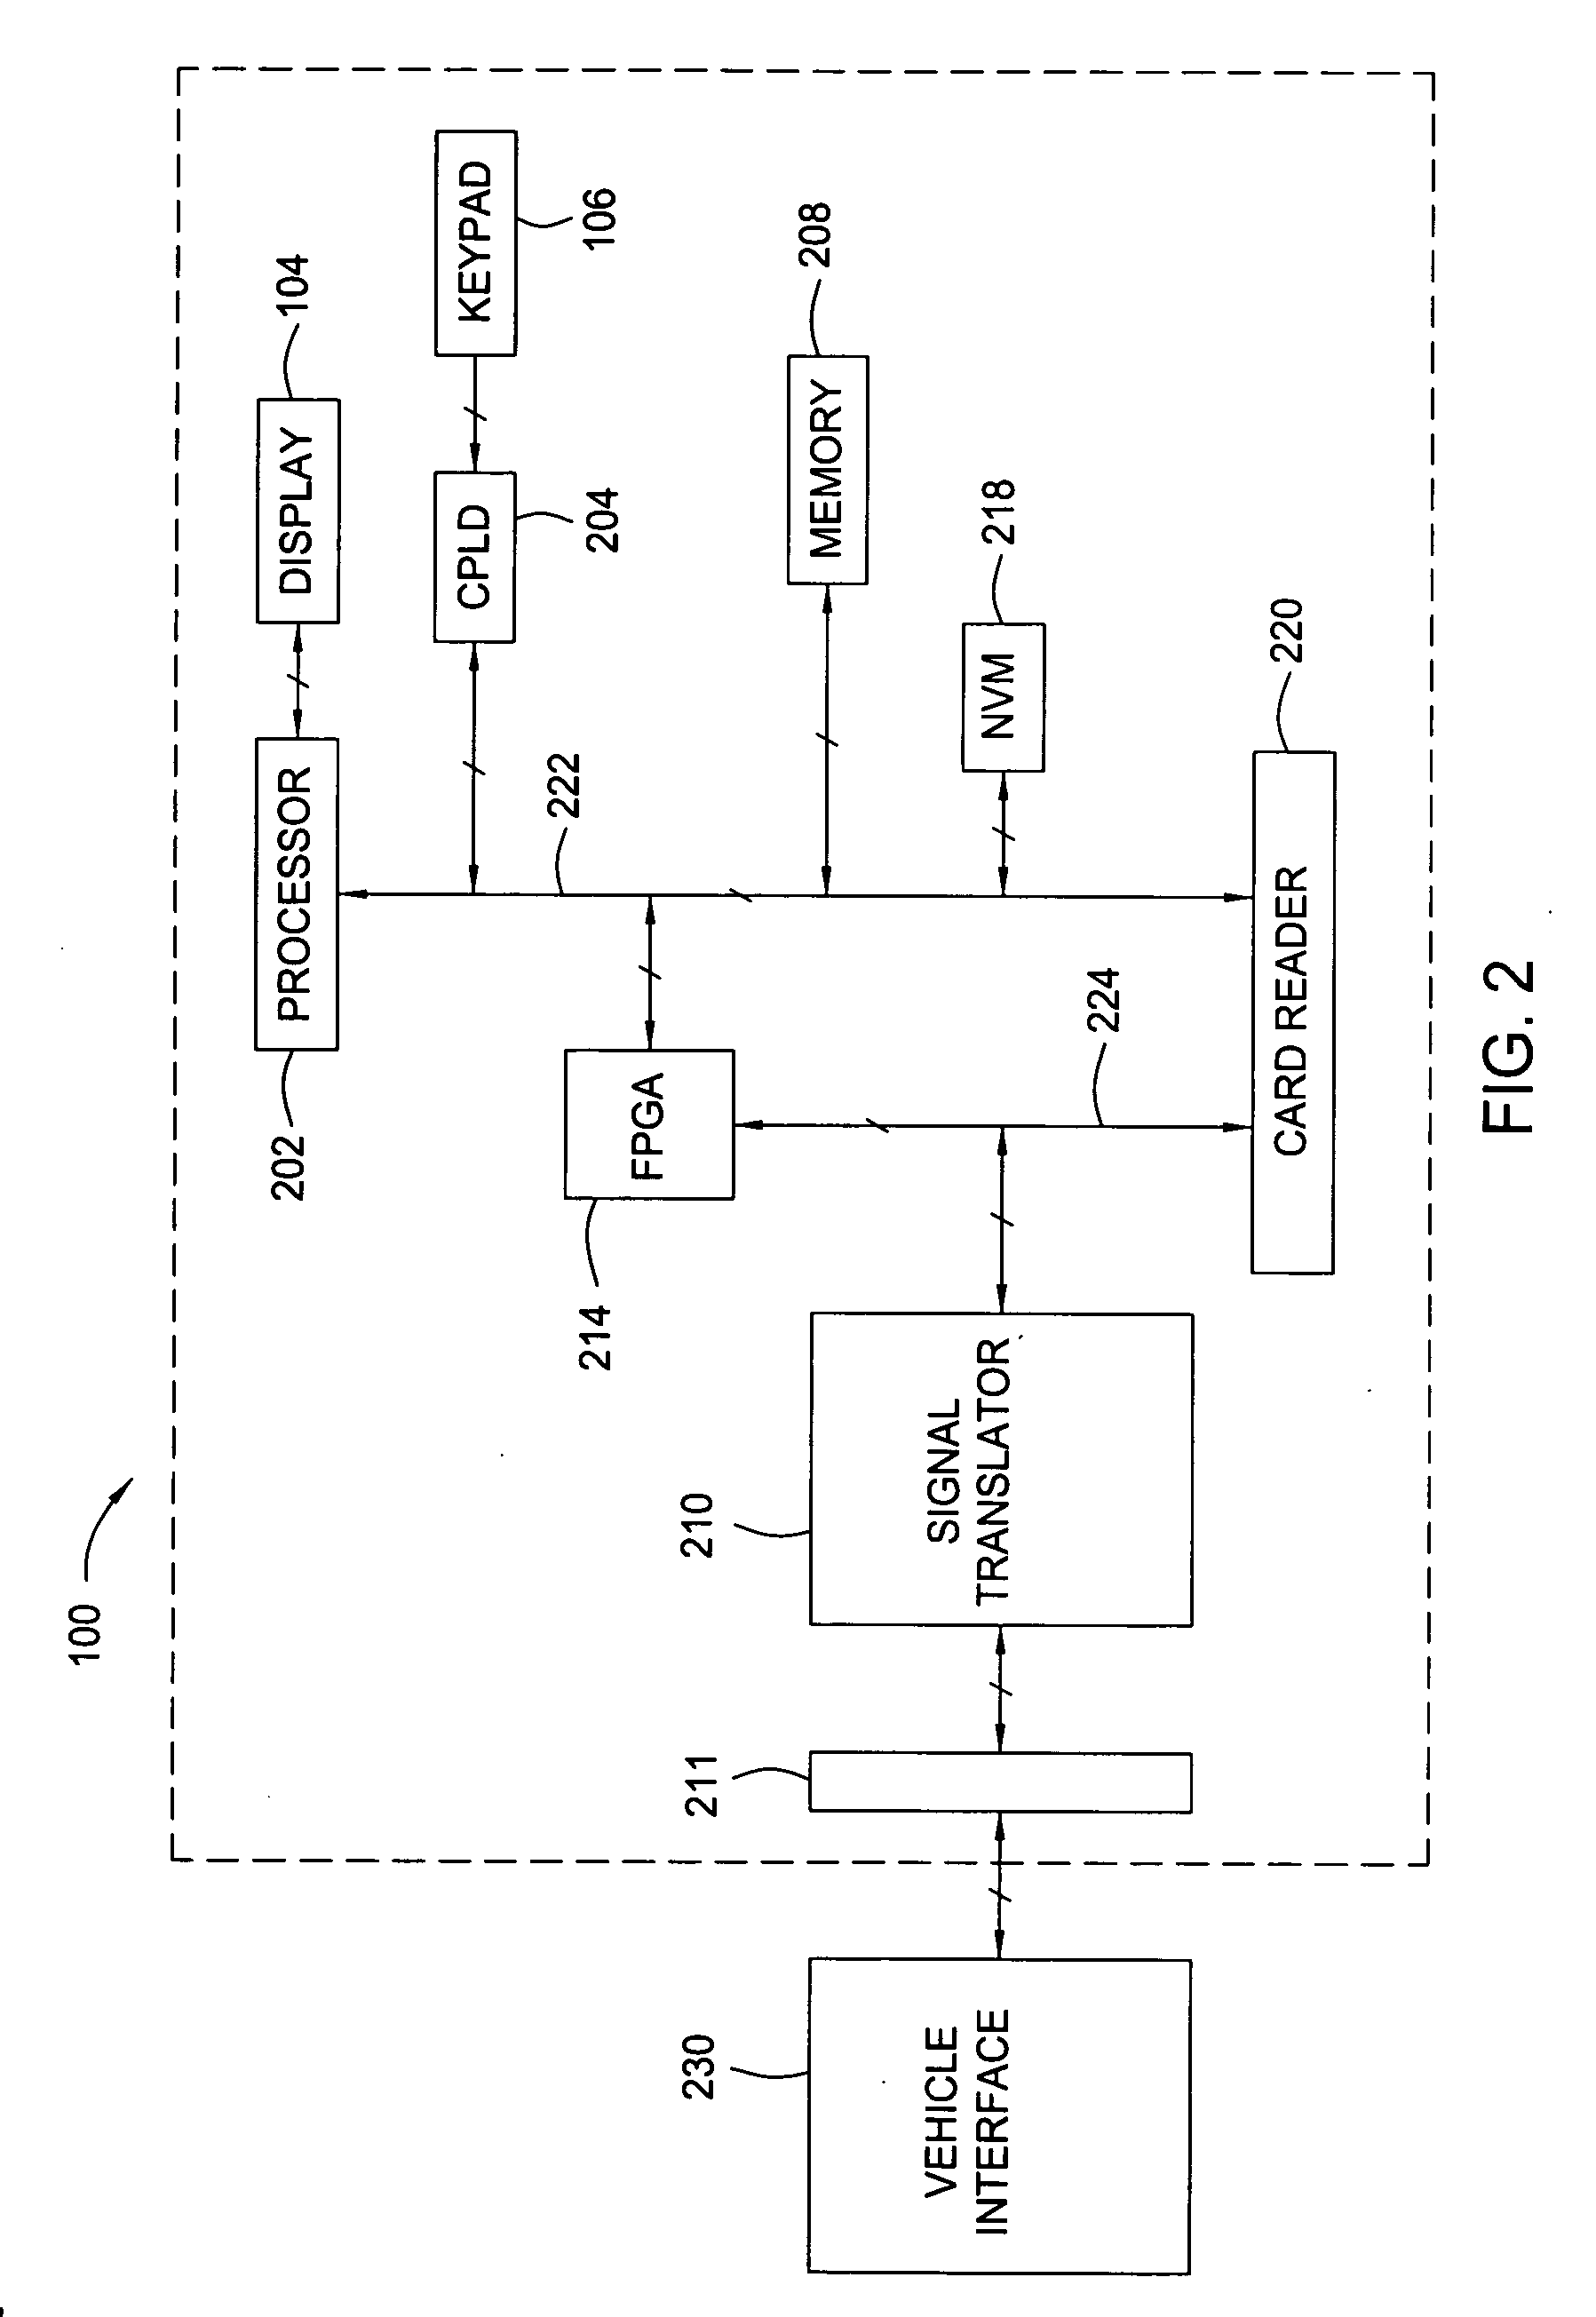 Method for having multiple software programs on a diagnostic tool